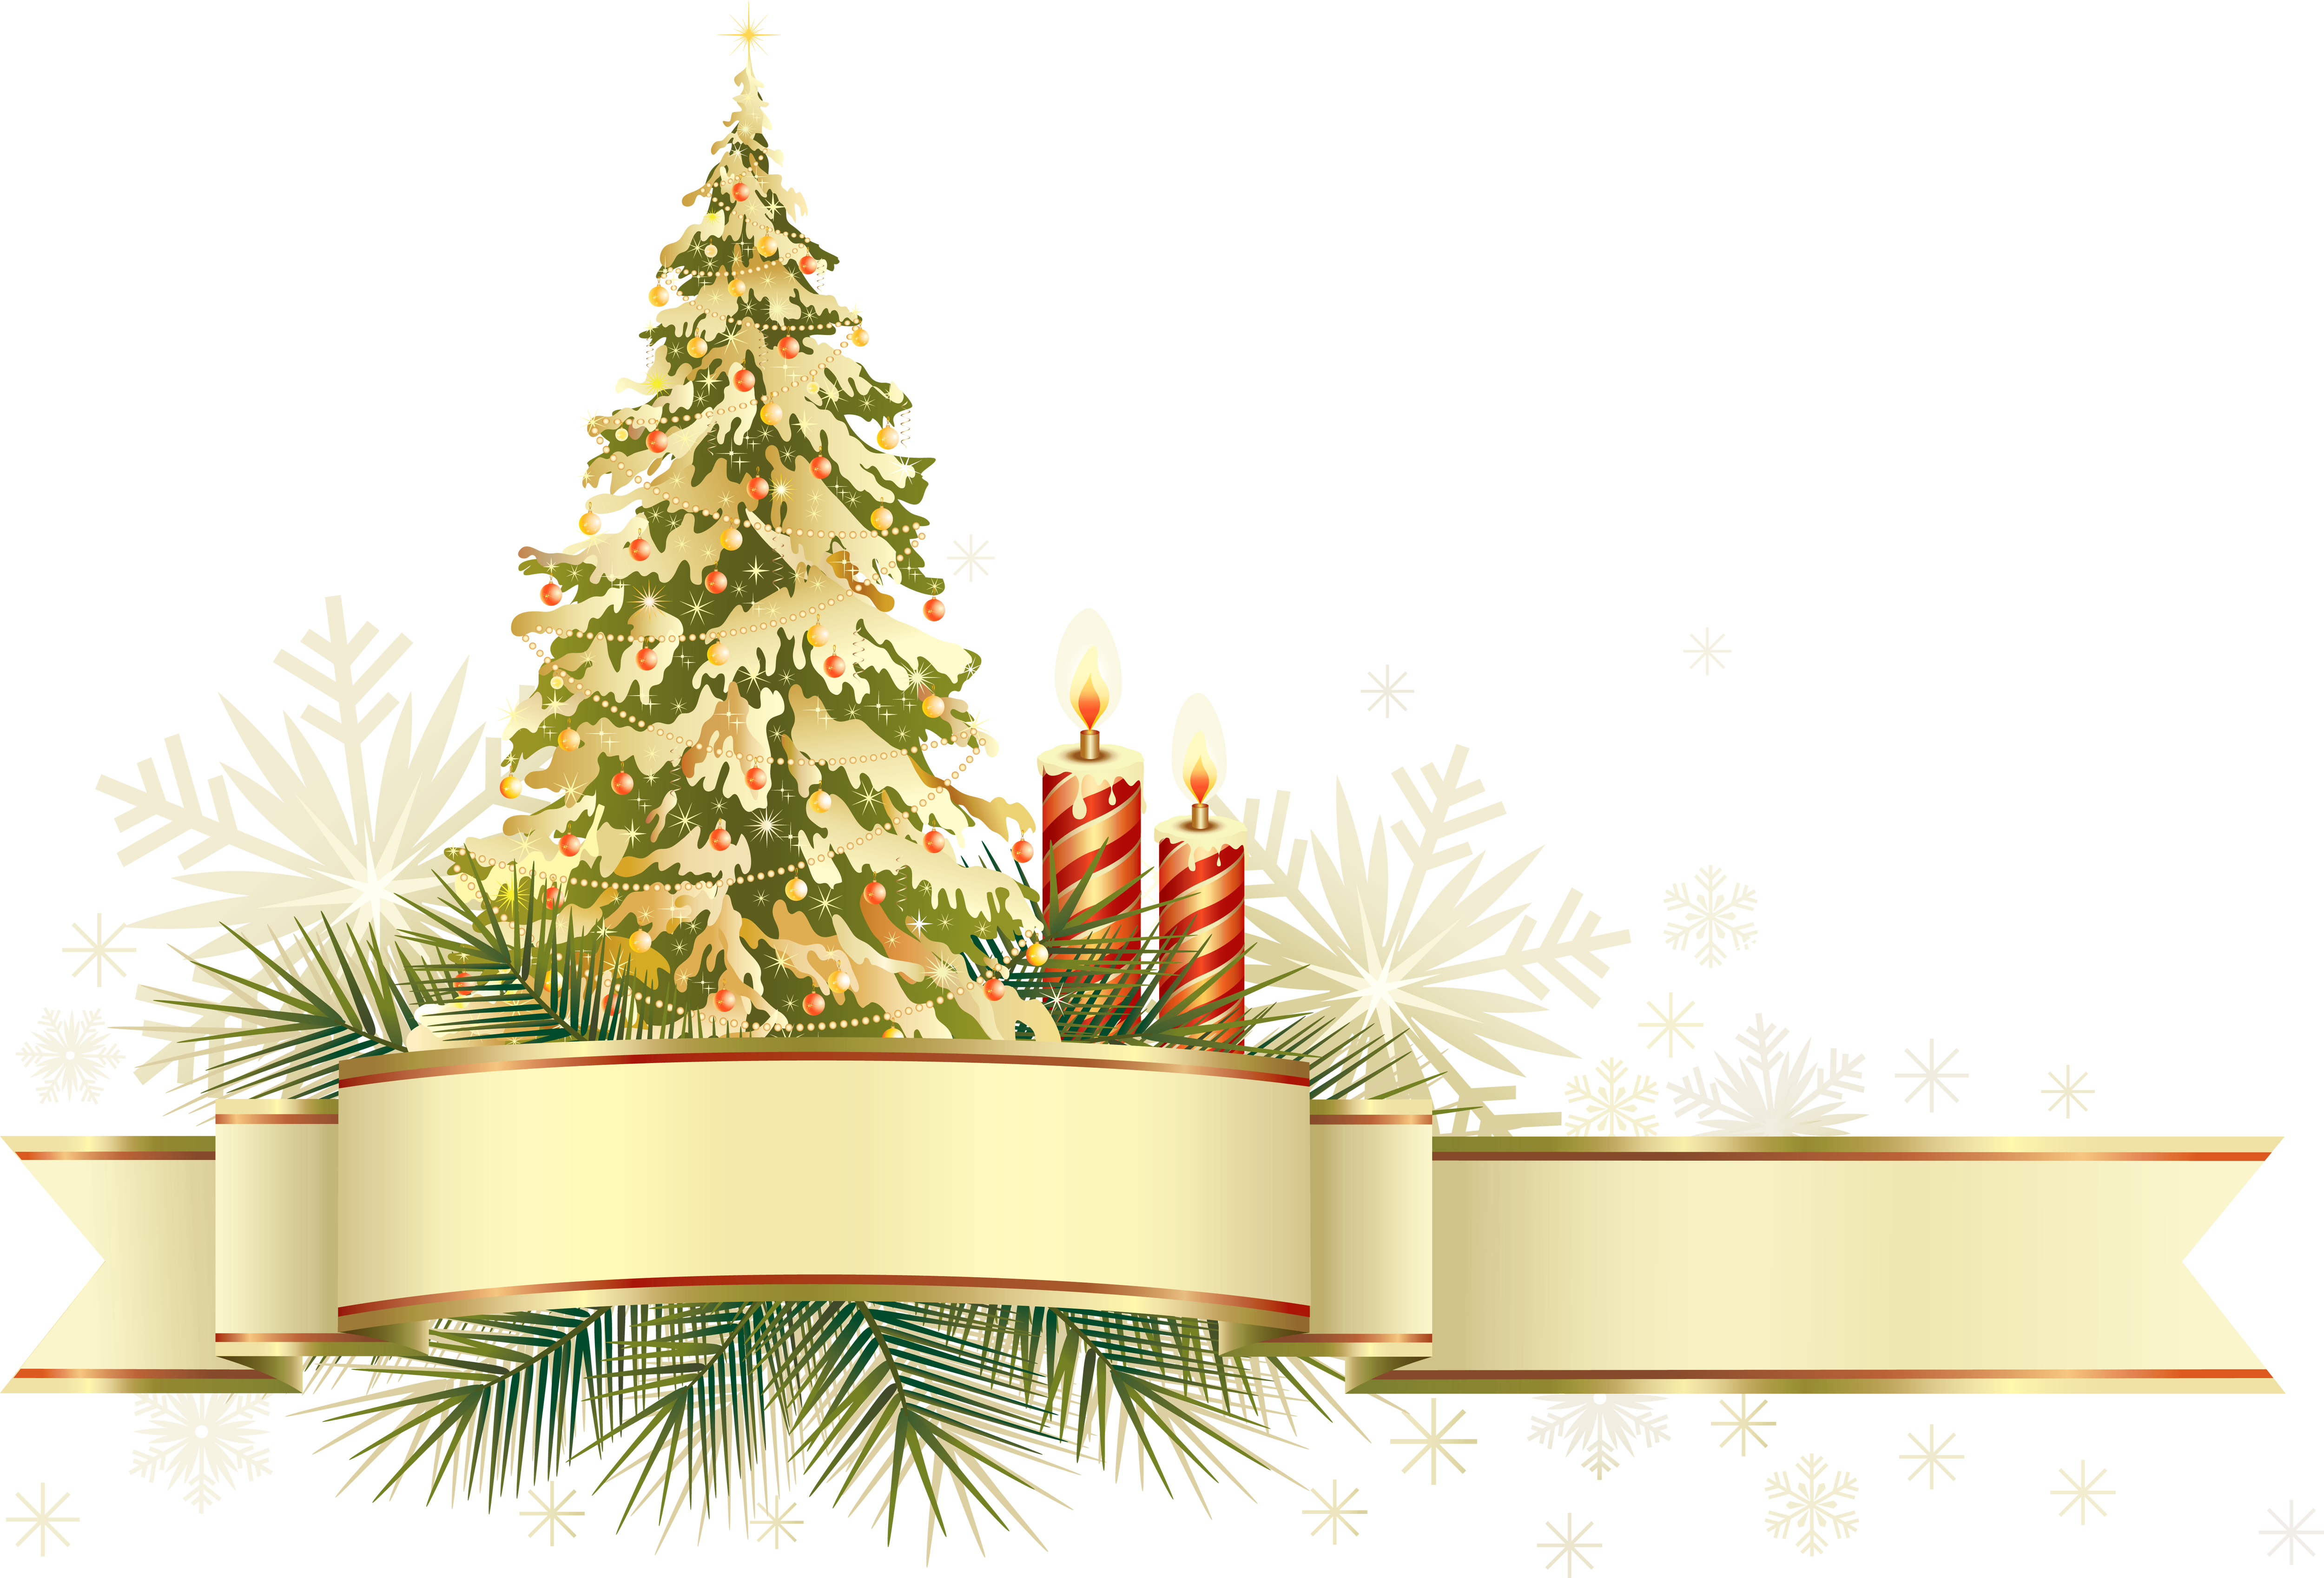 Xmas Images Free Png - Christmas Ornaments Png Image #35316, Transparent background PNG HD thumbnail